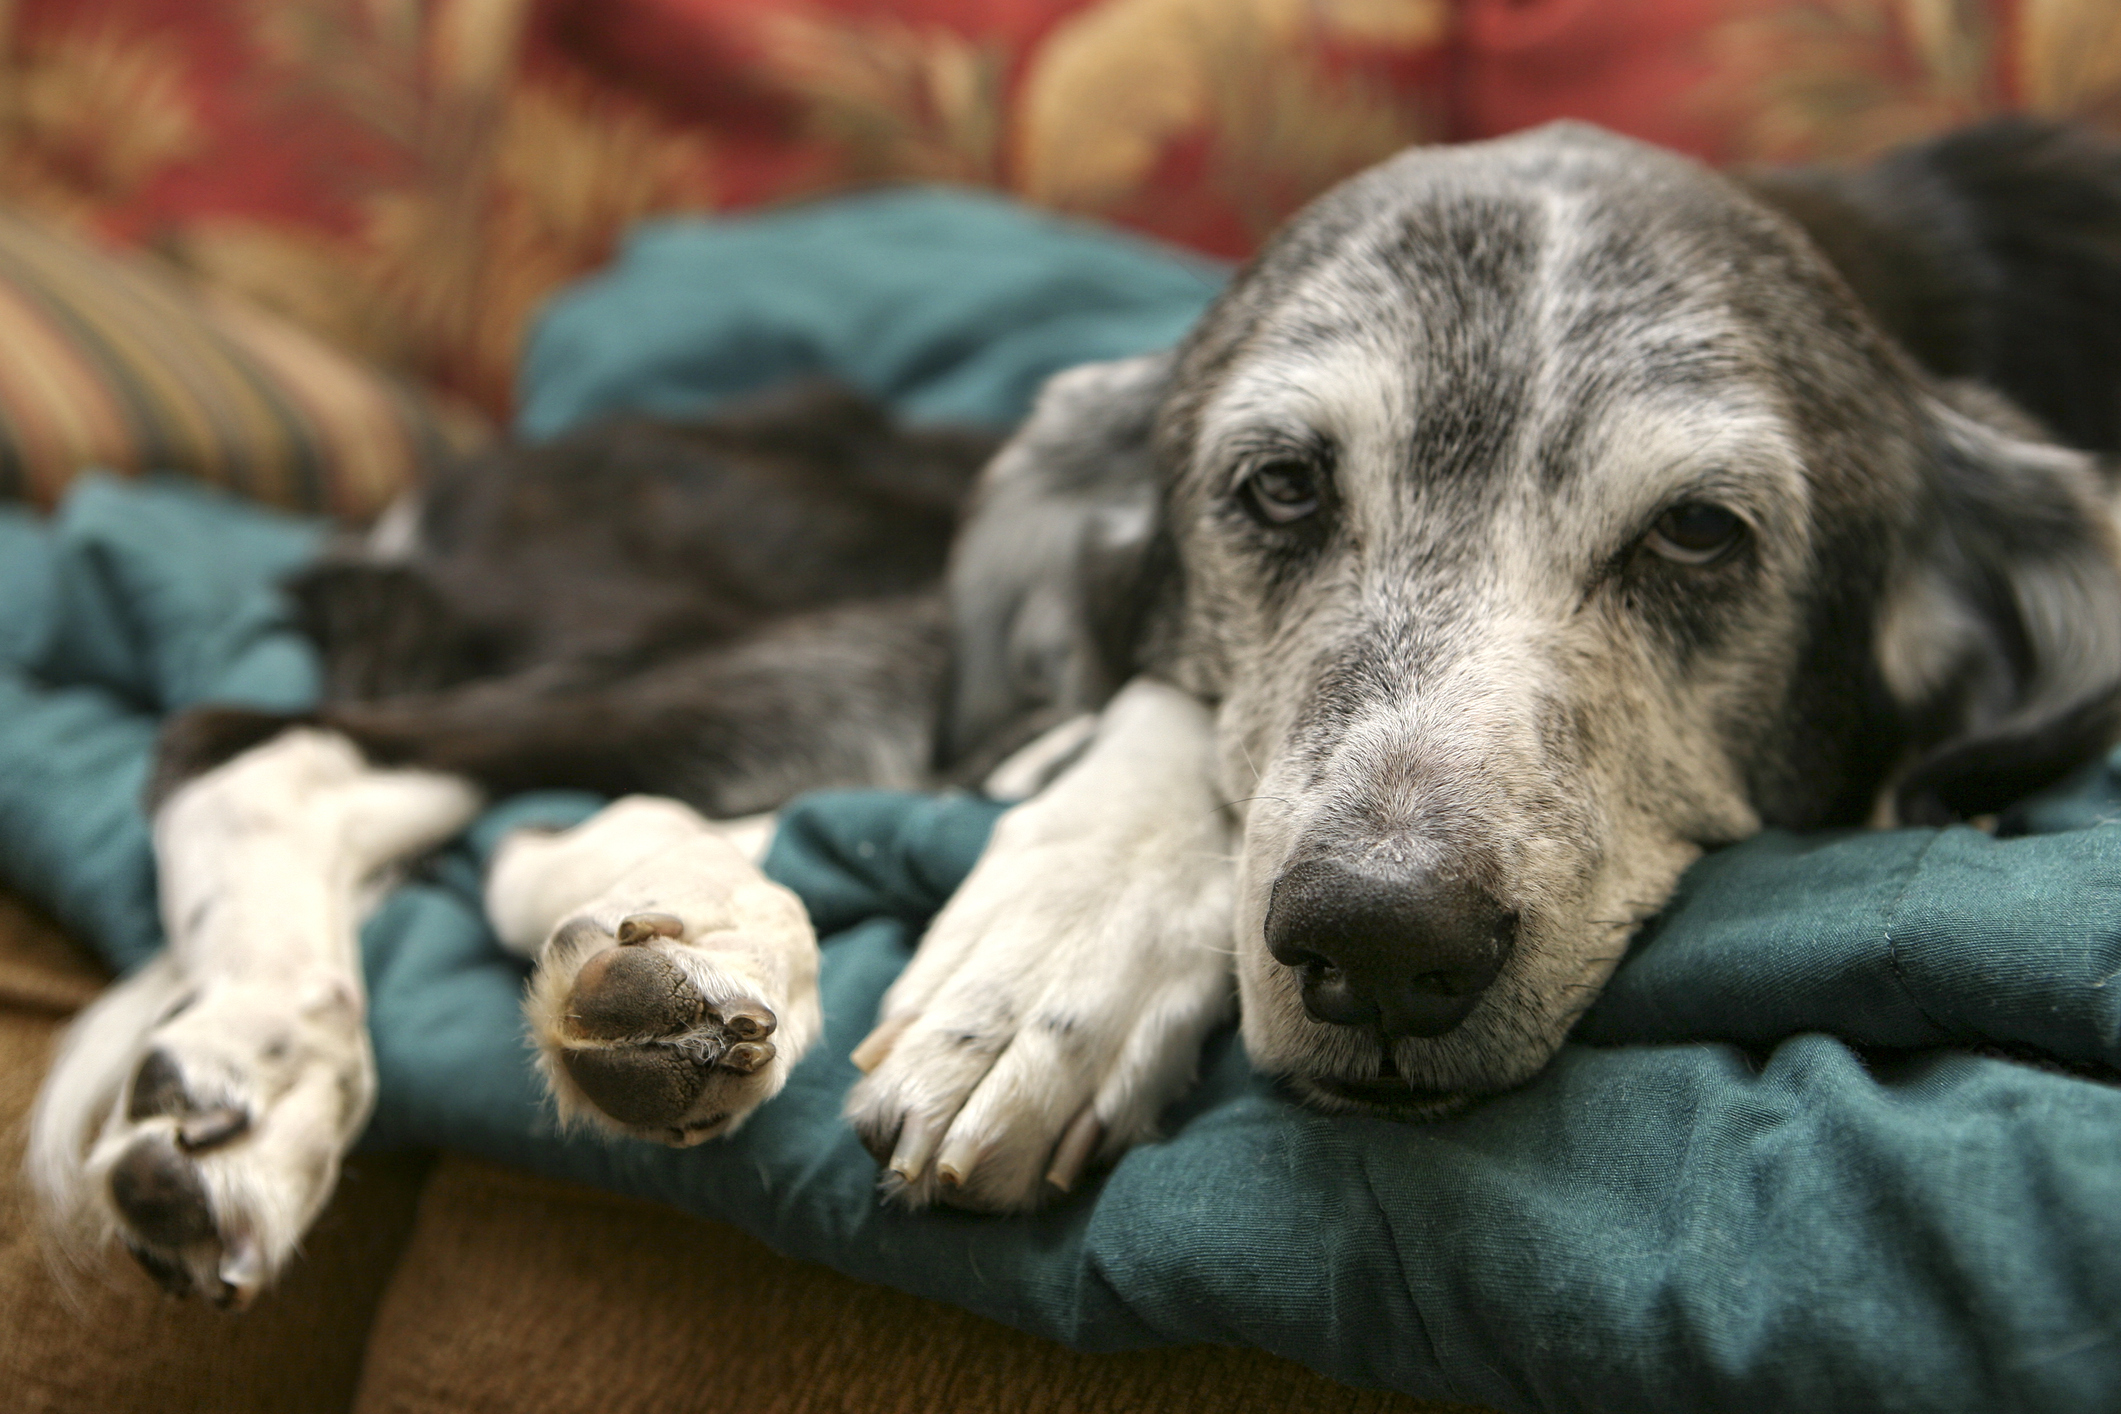 Old grey dog rests on the couch